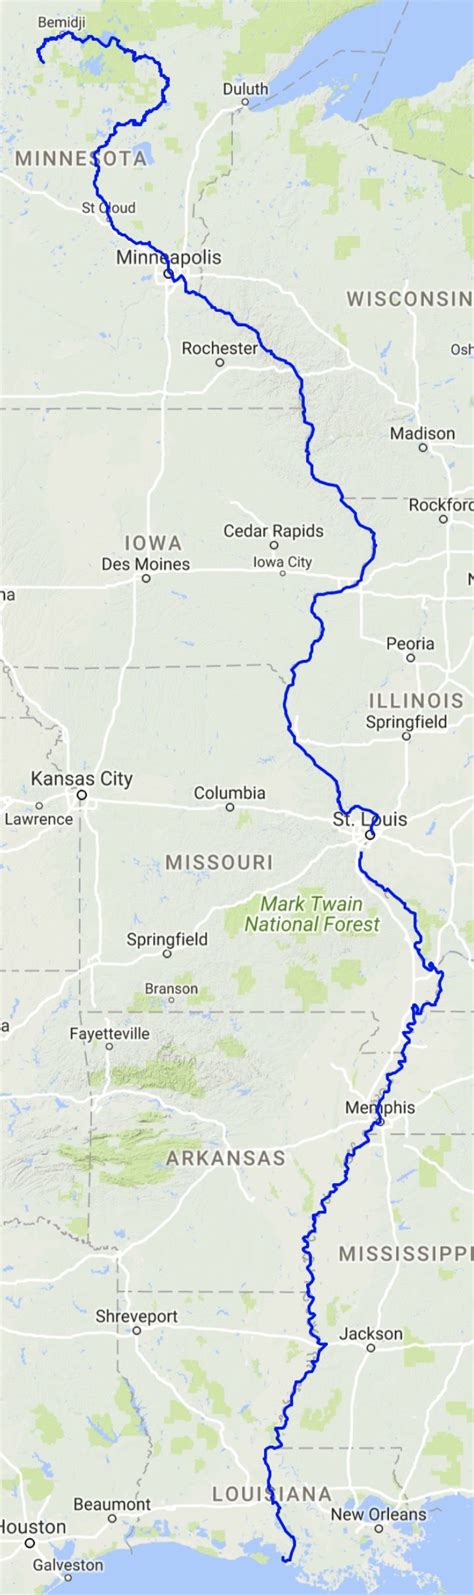 Mississippi River Source To Sea By Canoe Doing Miles Mississippi